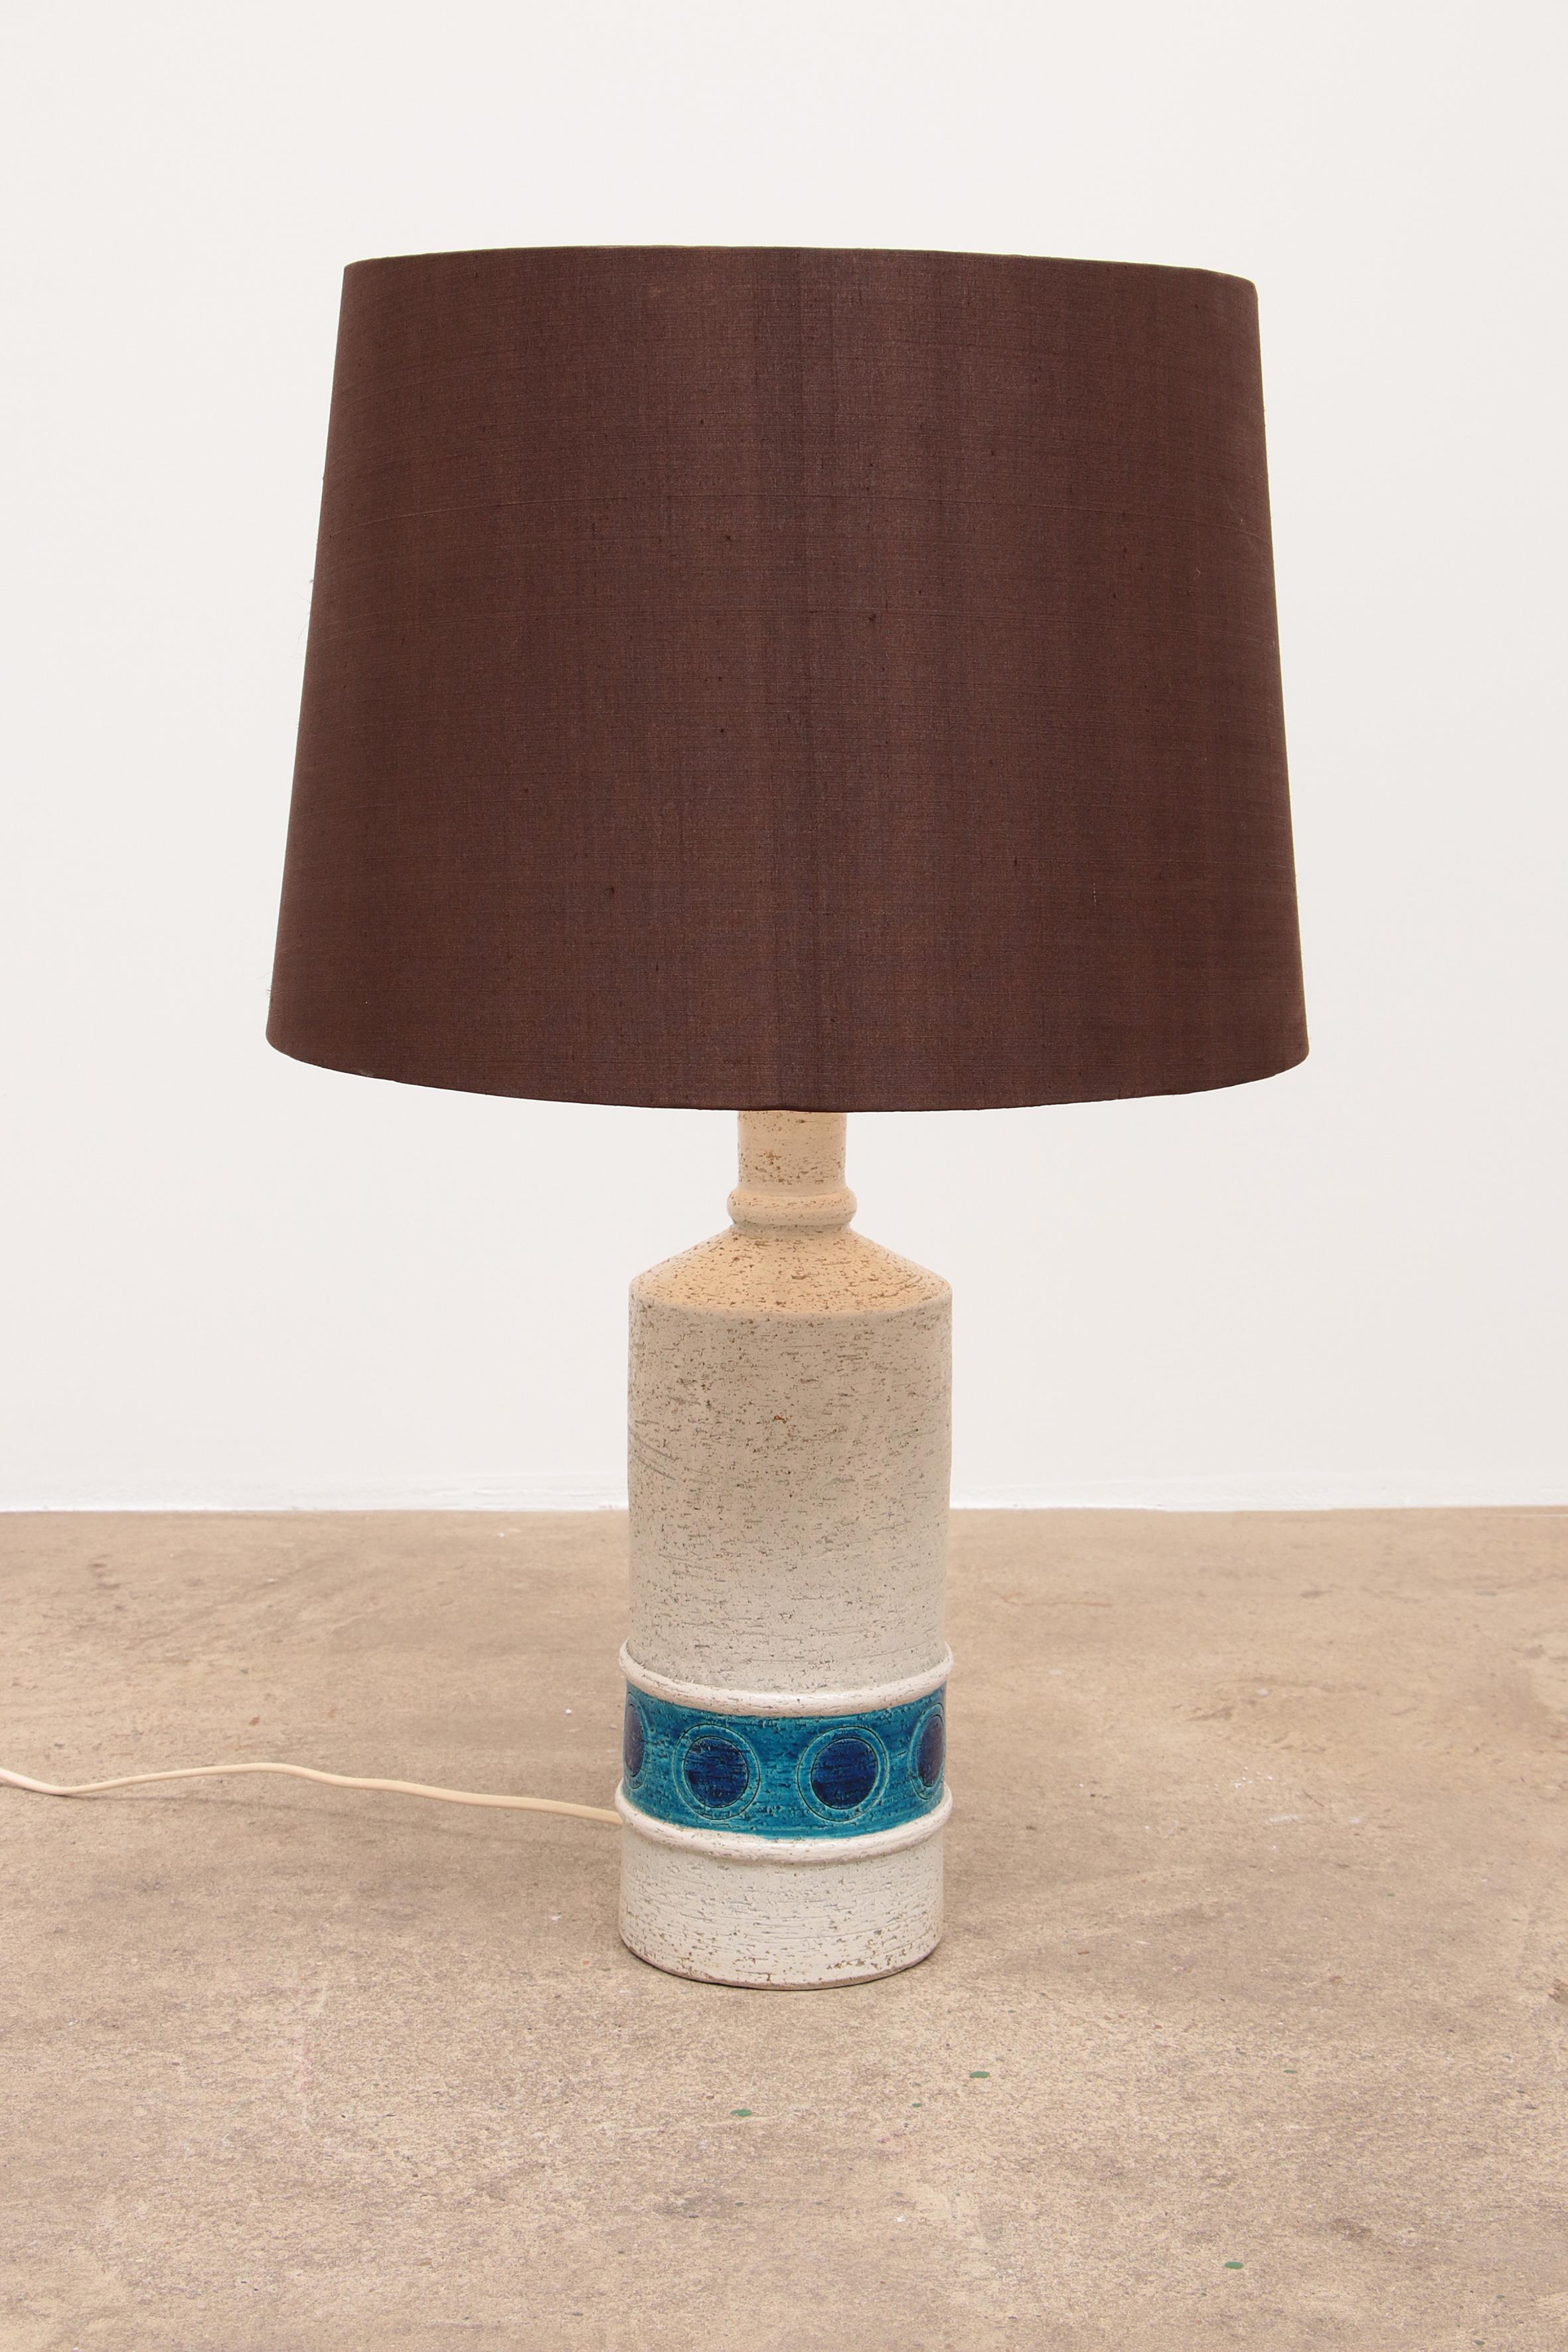 Unknown Table Lamp Made of Ceramic Design by Aldo Londi by Bergboms, 1960s For Sale